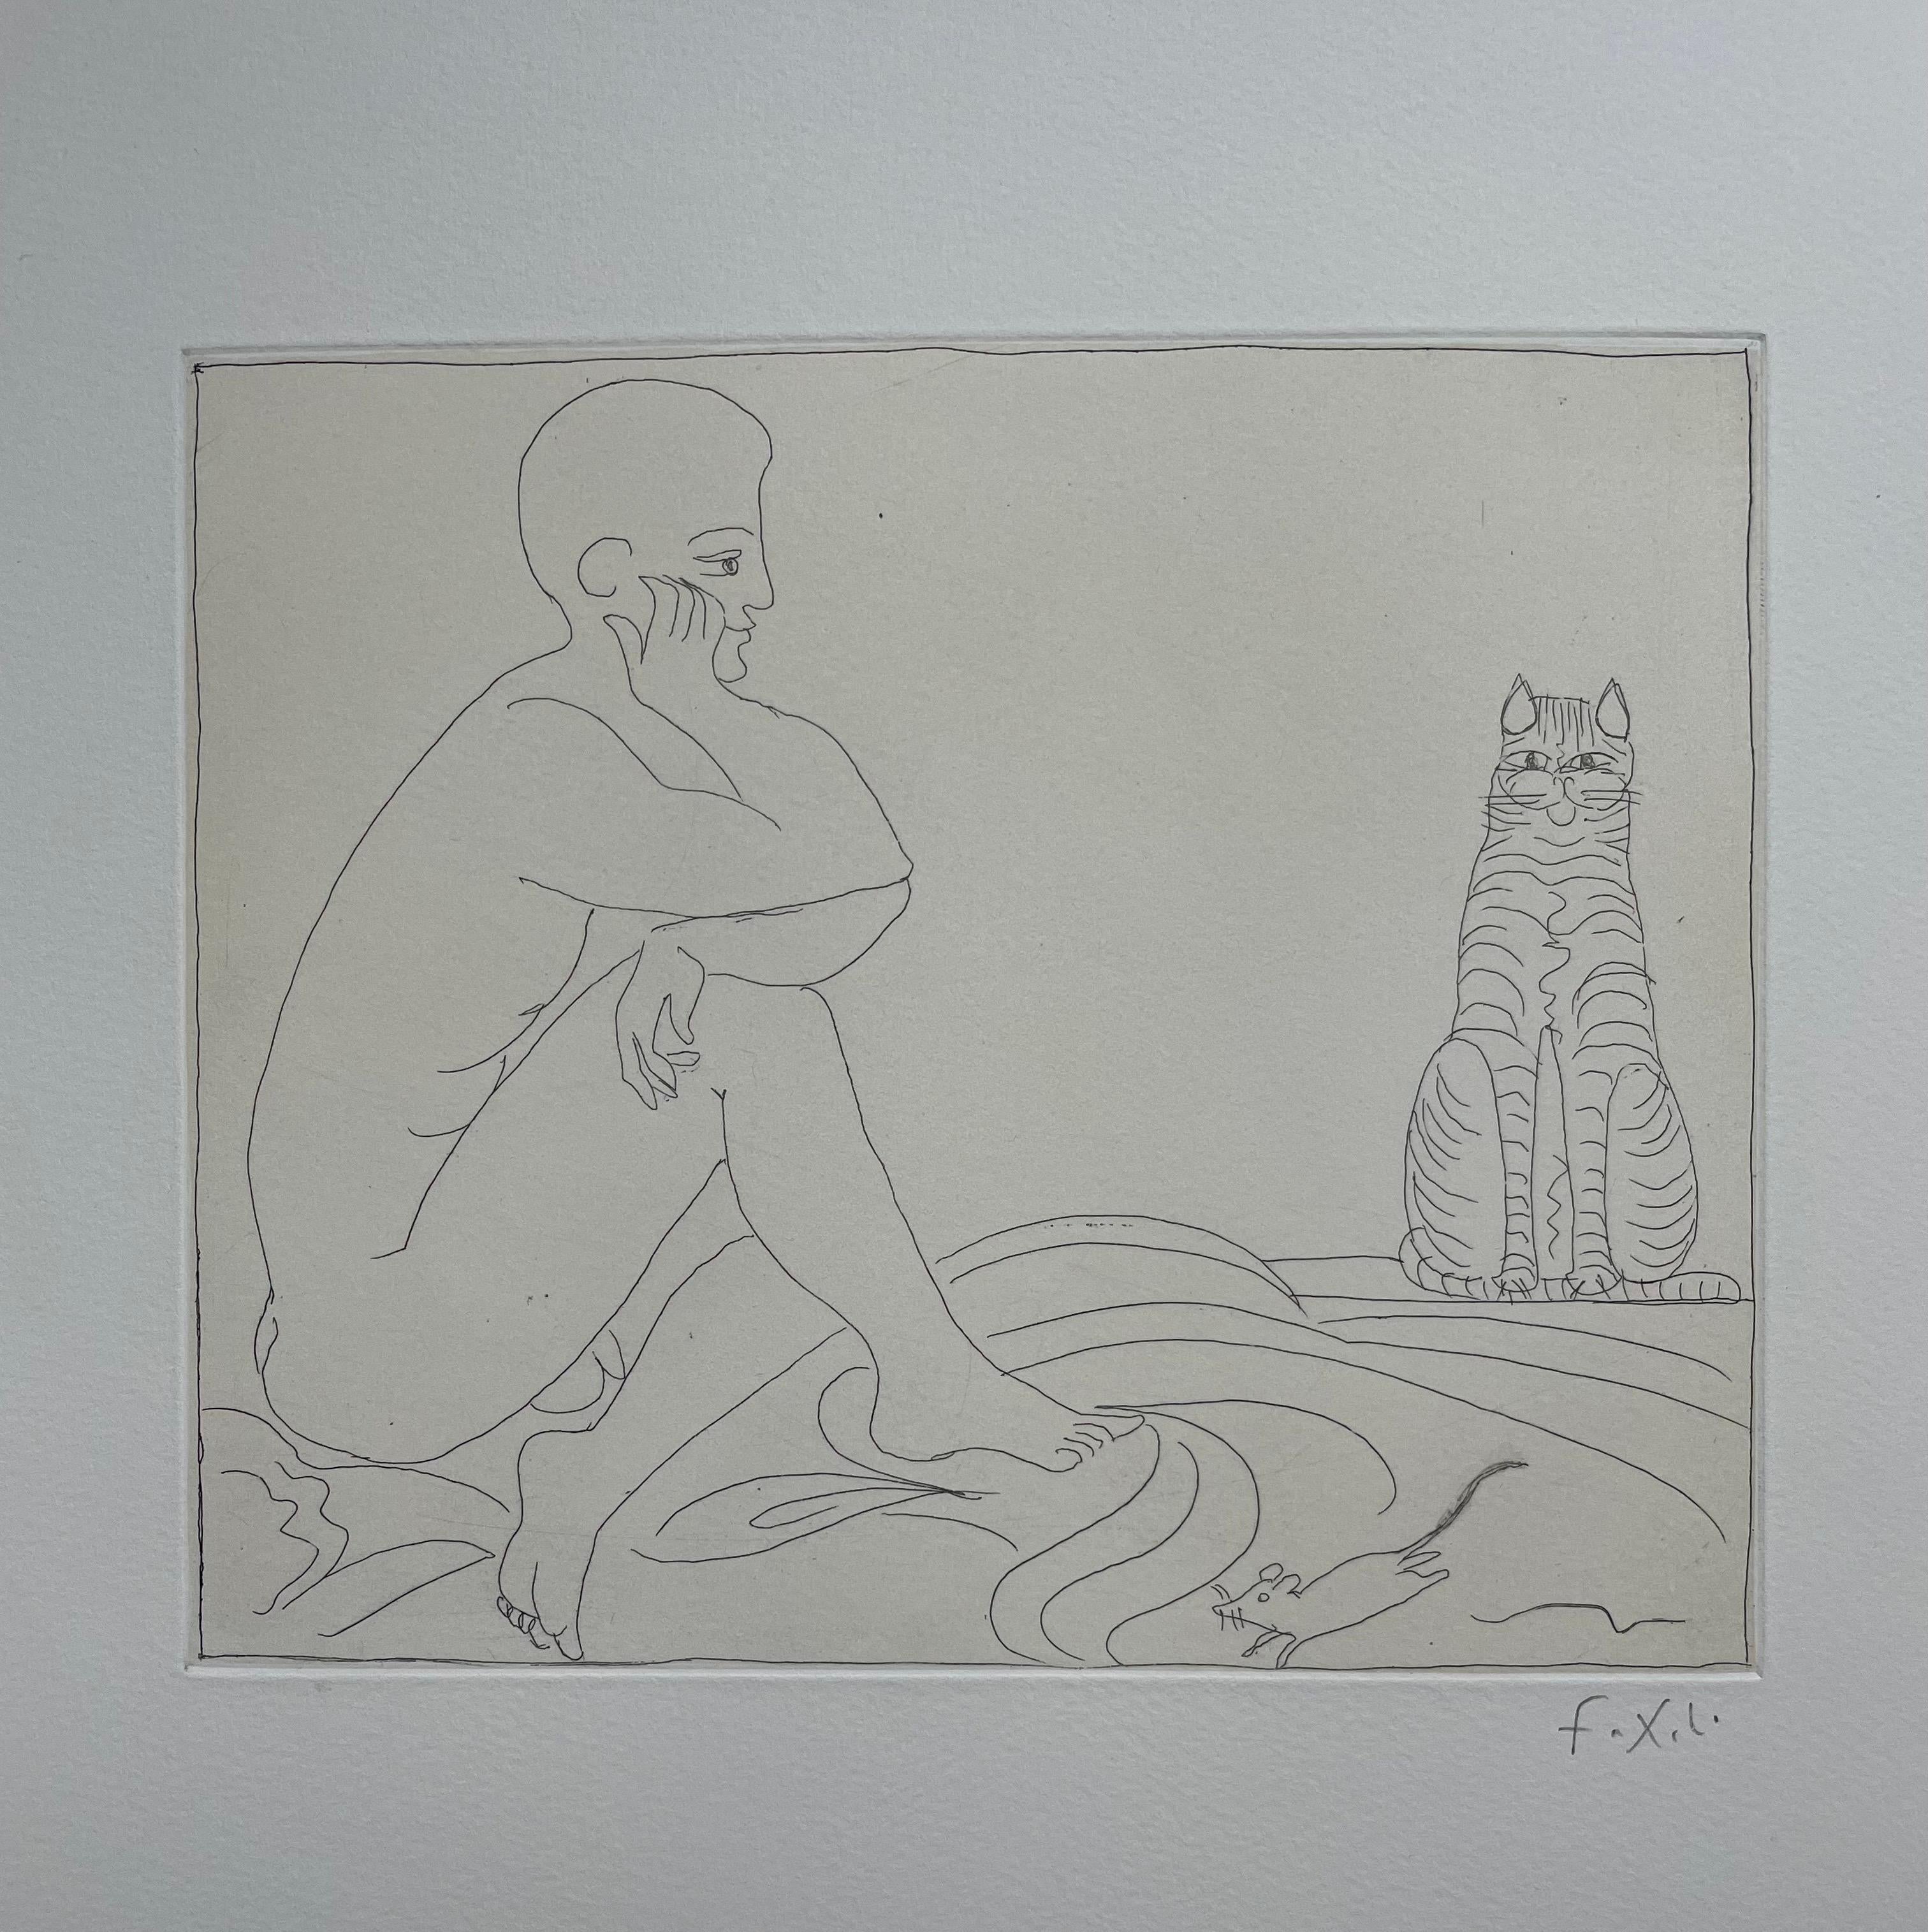 Francois-Xavier Lalanne (1927-2008) Cat, mouse and seated man, 2002
 
This print by François Xavier Lalanne depicts a cat, a mouse and a seated man. The cat is reminiscent of two sculptures of the artist : Chat Polymorphe (1968) and Chat Perché